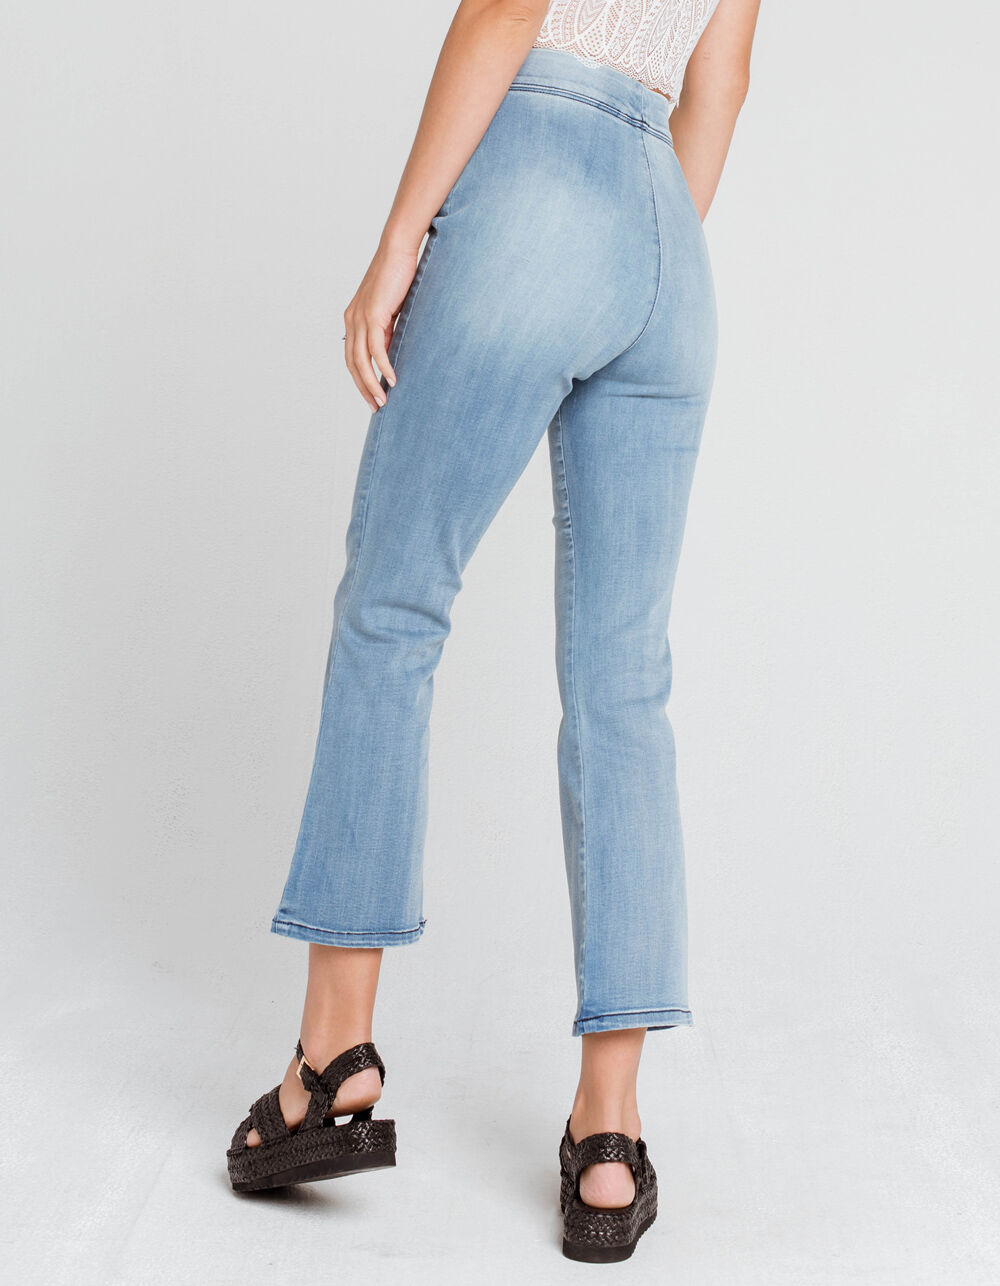 WEST OF MELROSE Flare And Square Pull On Womens Light Wash Jeans ...